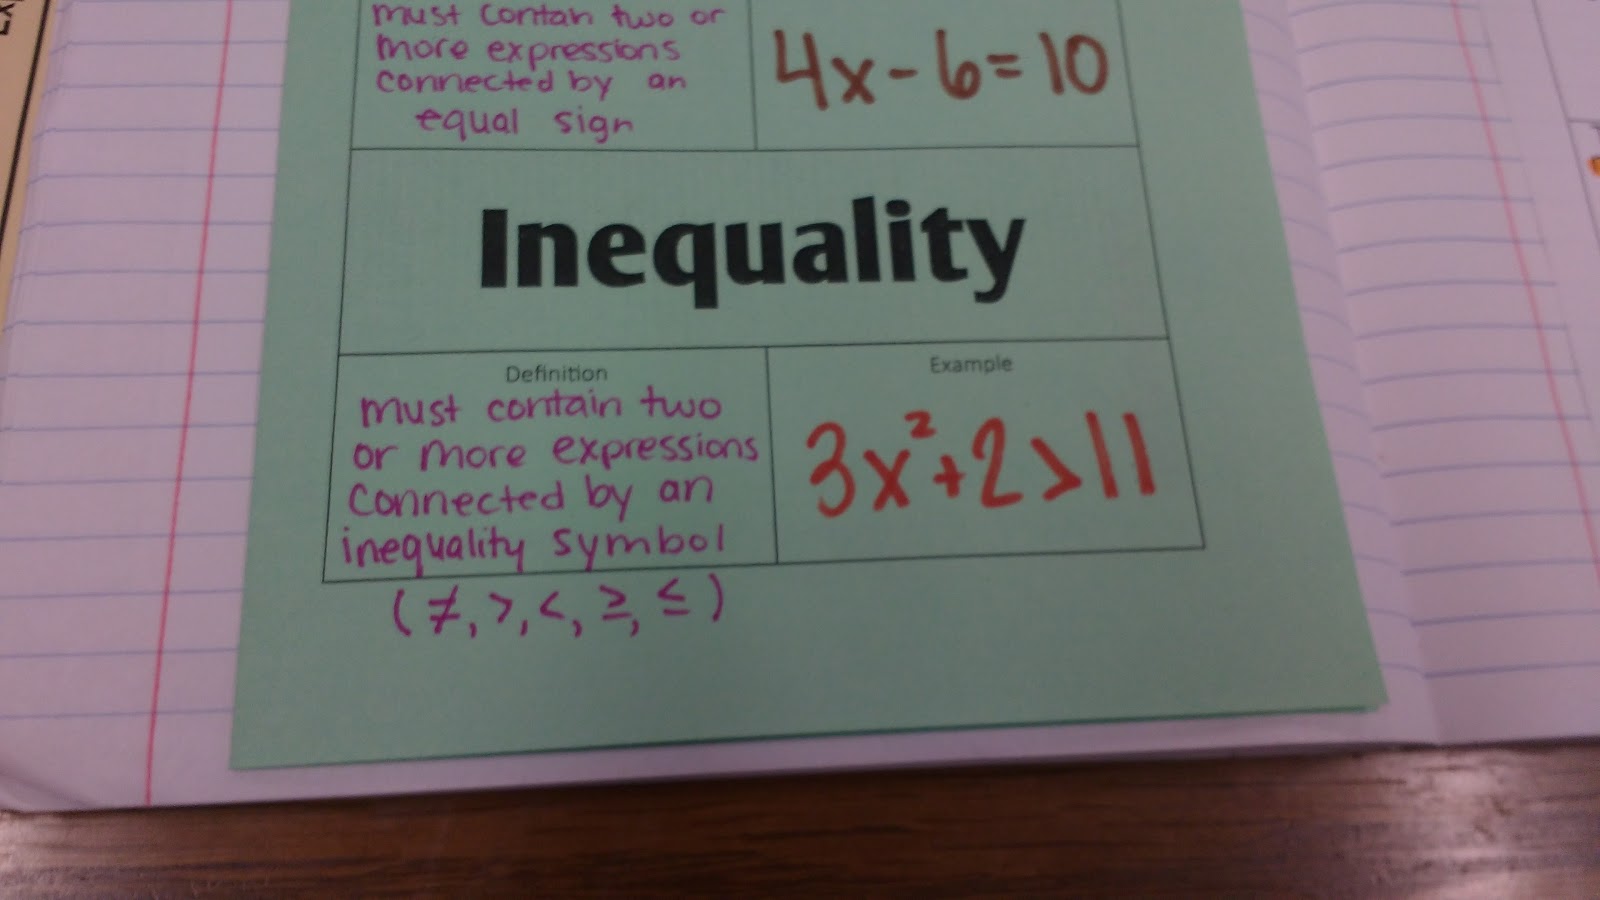 Expression vs Equation vs Inequality Notes. 